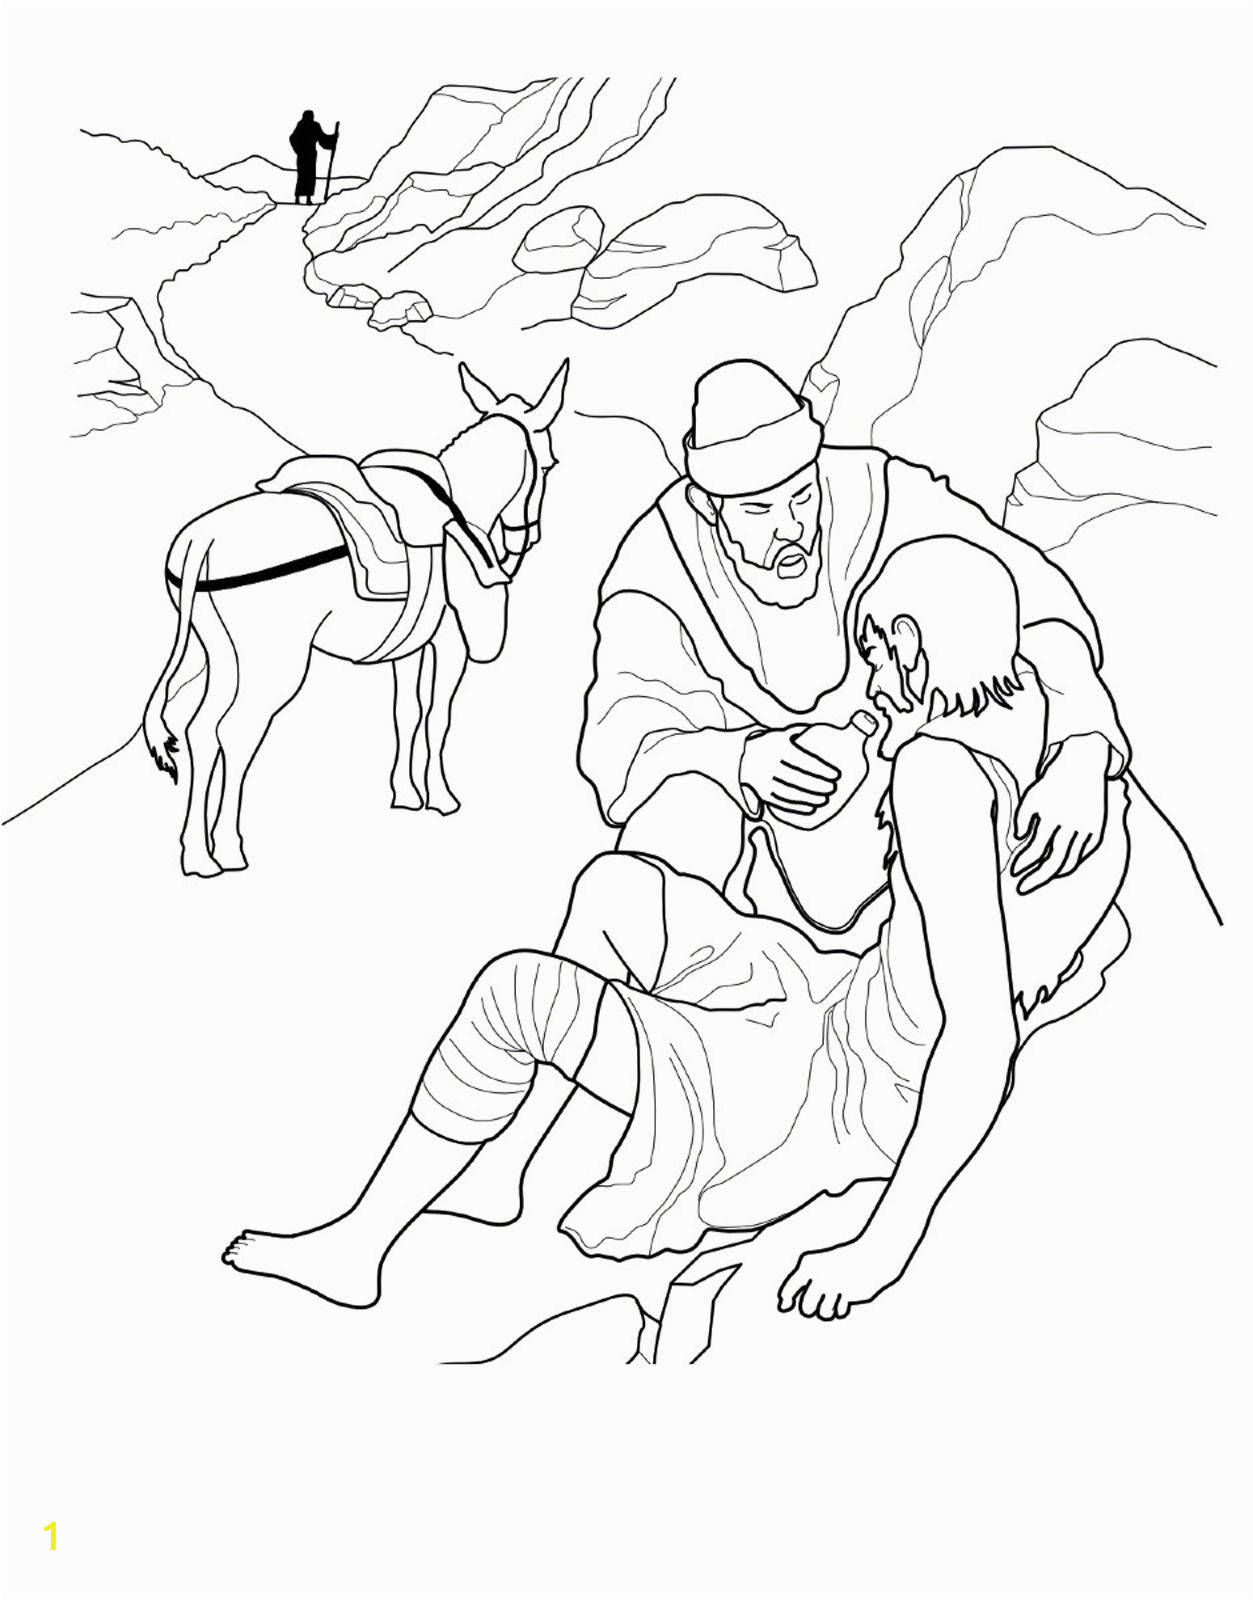 Coloring Pages for Good Samaritan A Coloring Page for Children Of "the Good Samaritan" From